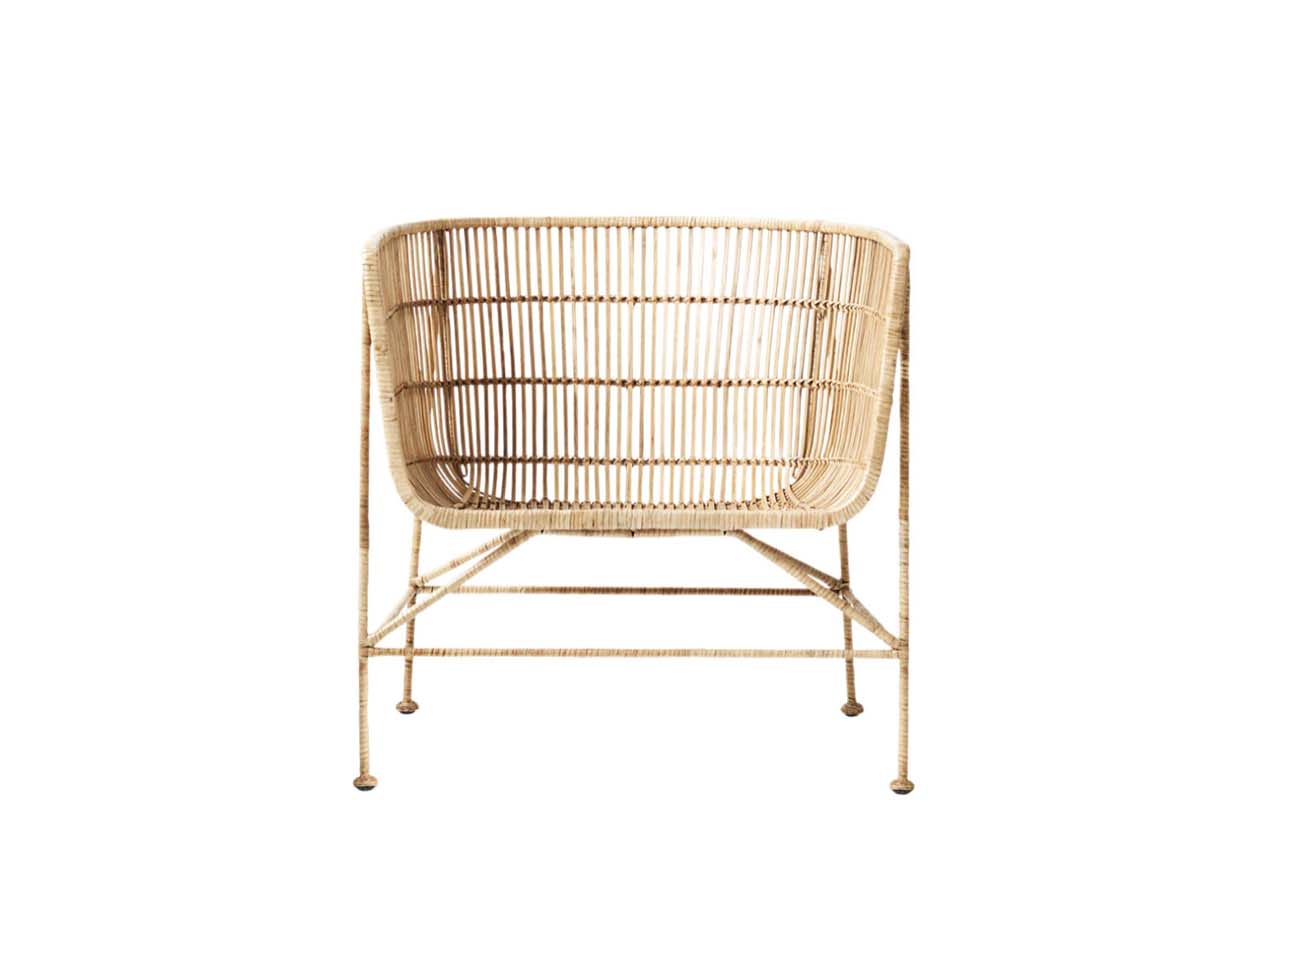 Elevate Your Home Decor with Stylish Wicker and Rattan Chairs